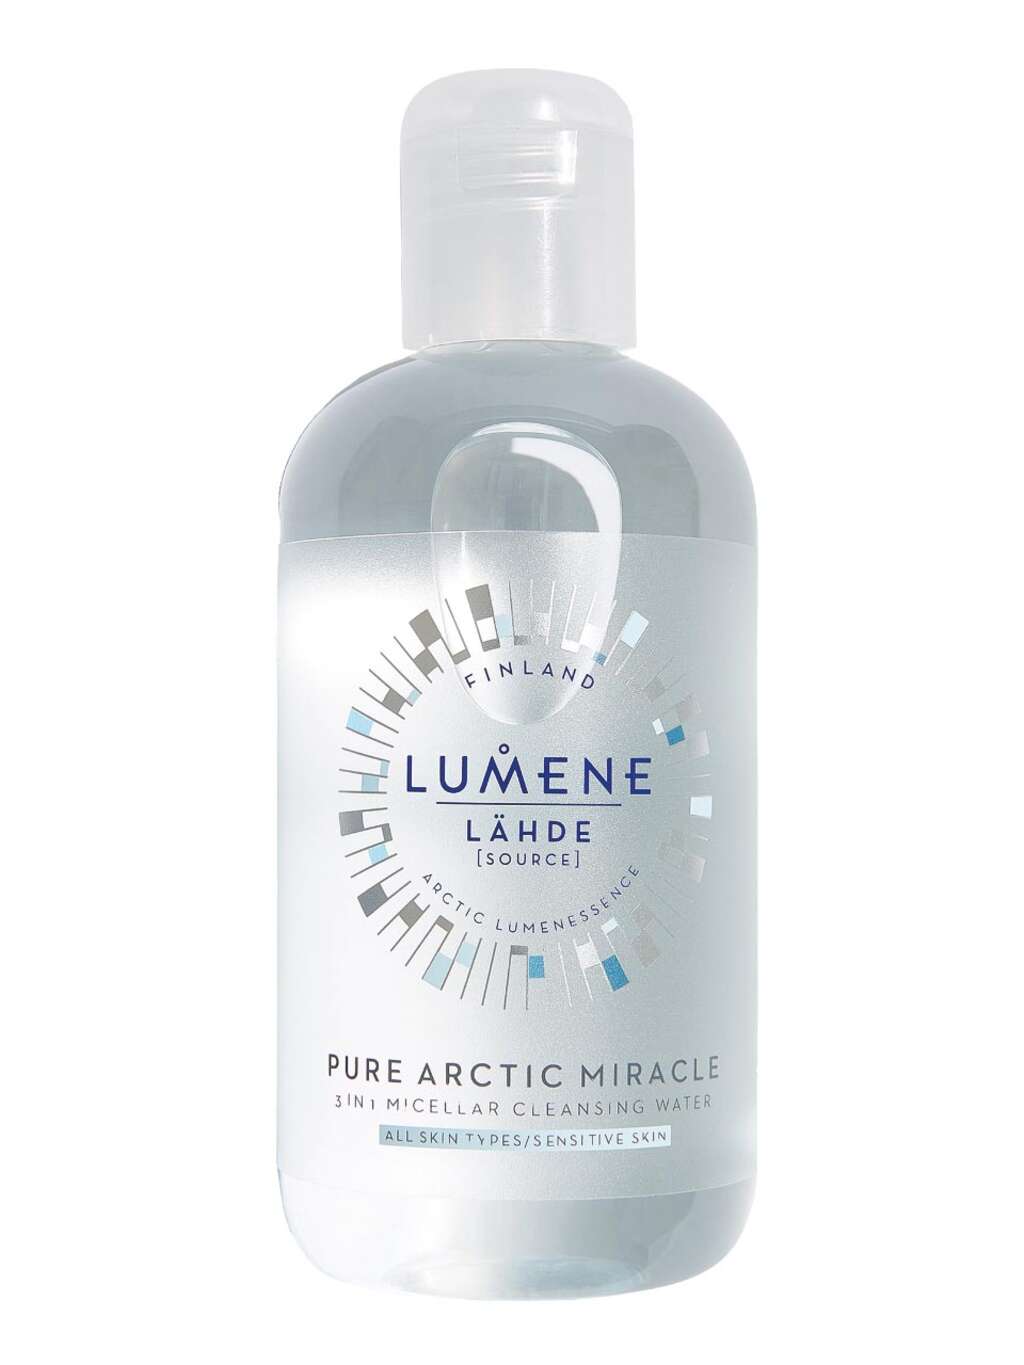 Nordic Hydra (Lähde) Pure Arctic Miracle 3-in-1 Micellar Cleansing Water